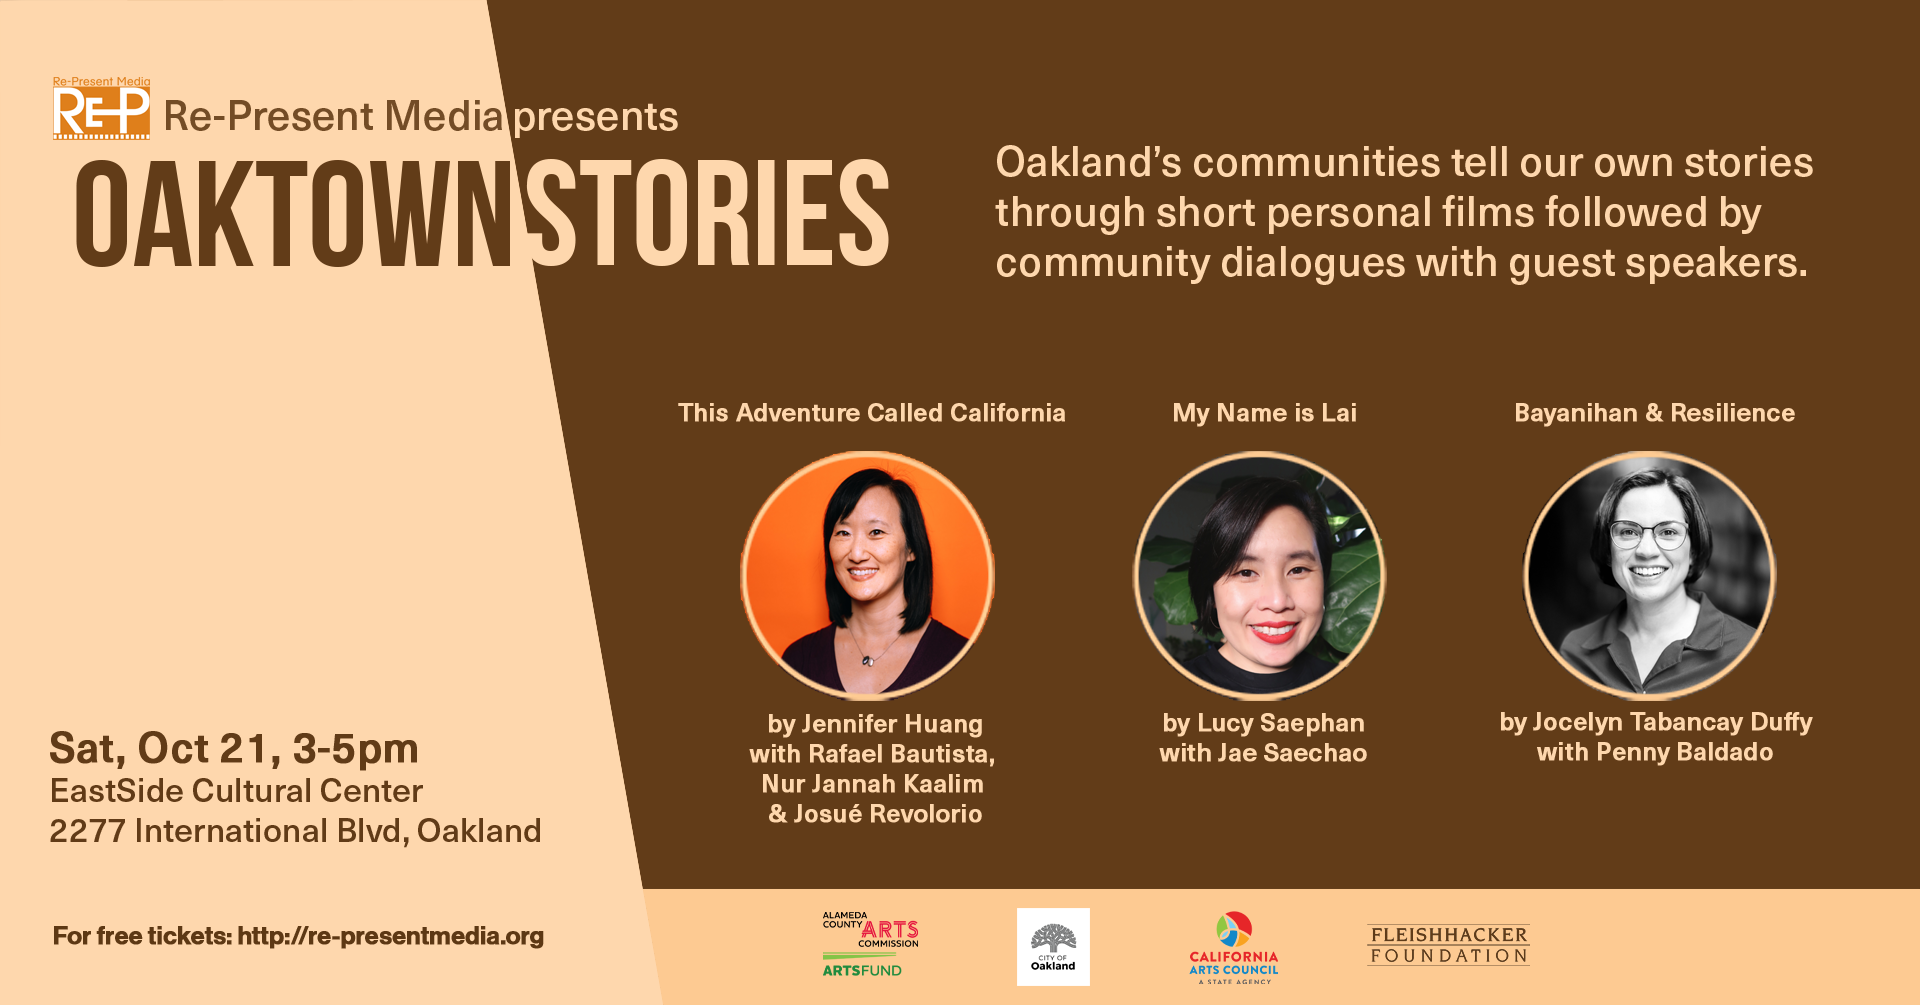 Oaktown Stories - Oct 21 Saturday, October 21 2023 3:00 PM — 5:00 PM "Bayanihan & Resilience" (Jocelyn Tabancay Duffy) With Penny Baldado. "My Name is Lai" (Lucy Saephan) With Jae Saechao. "This Adventure Called California" (Jennifer Huang) With Arnoldo Lopez, Rafael Bautista, Nur Jannah Kaalim, and Josué Revolorio. For free tickets: https://re-presentmedia.ticketleap.com/oaktownstories2023-2